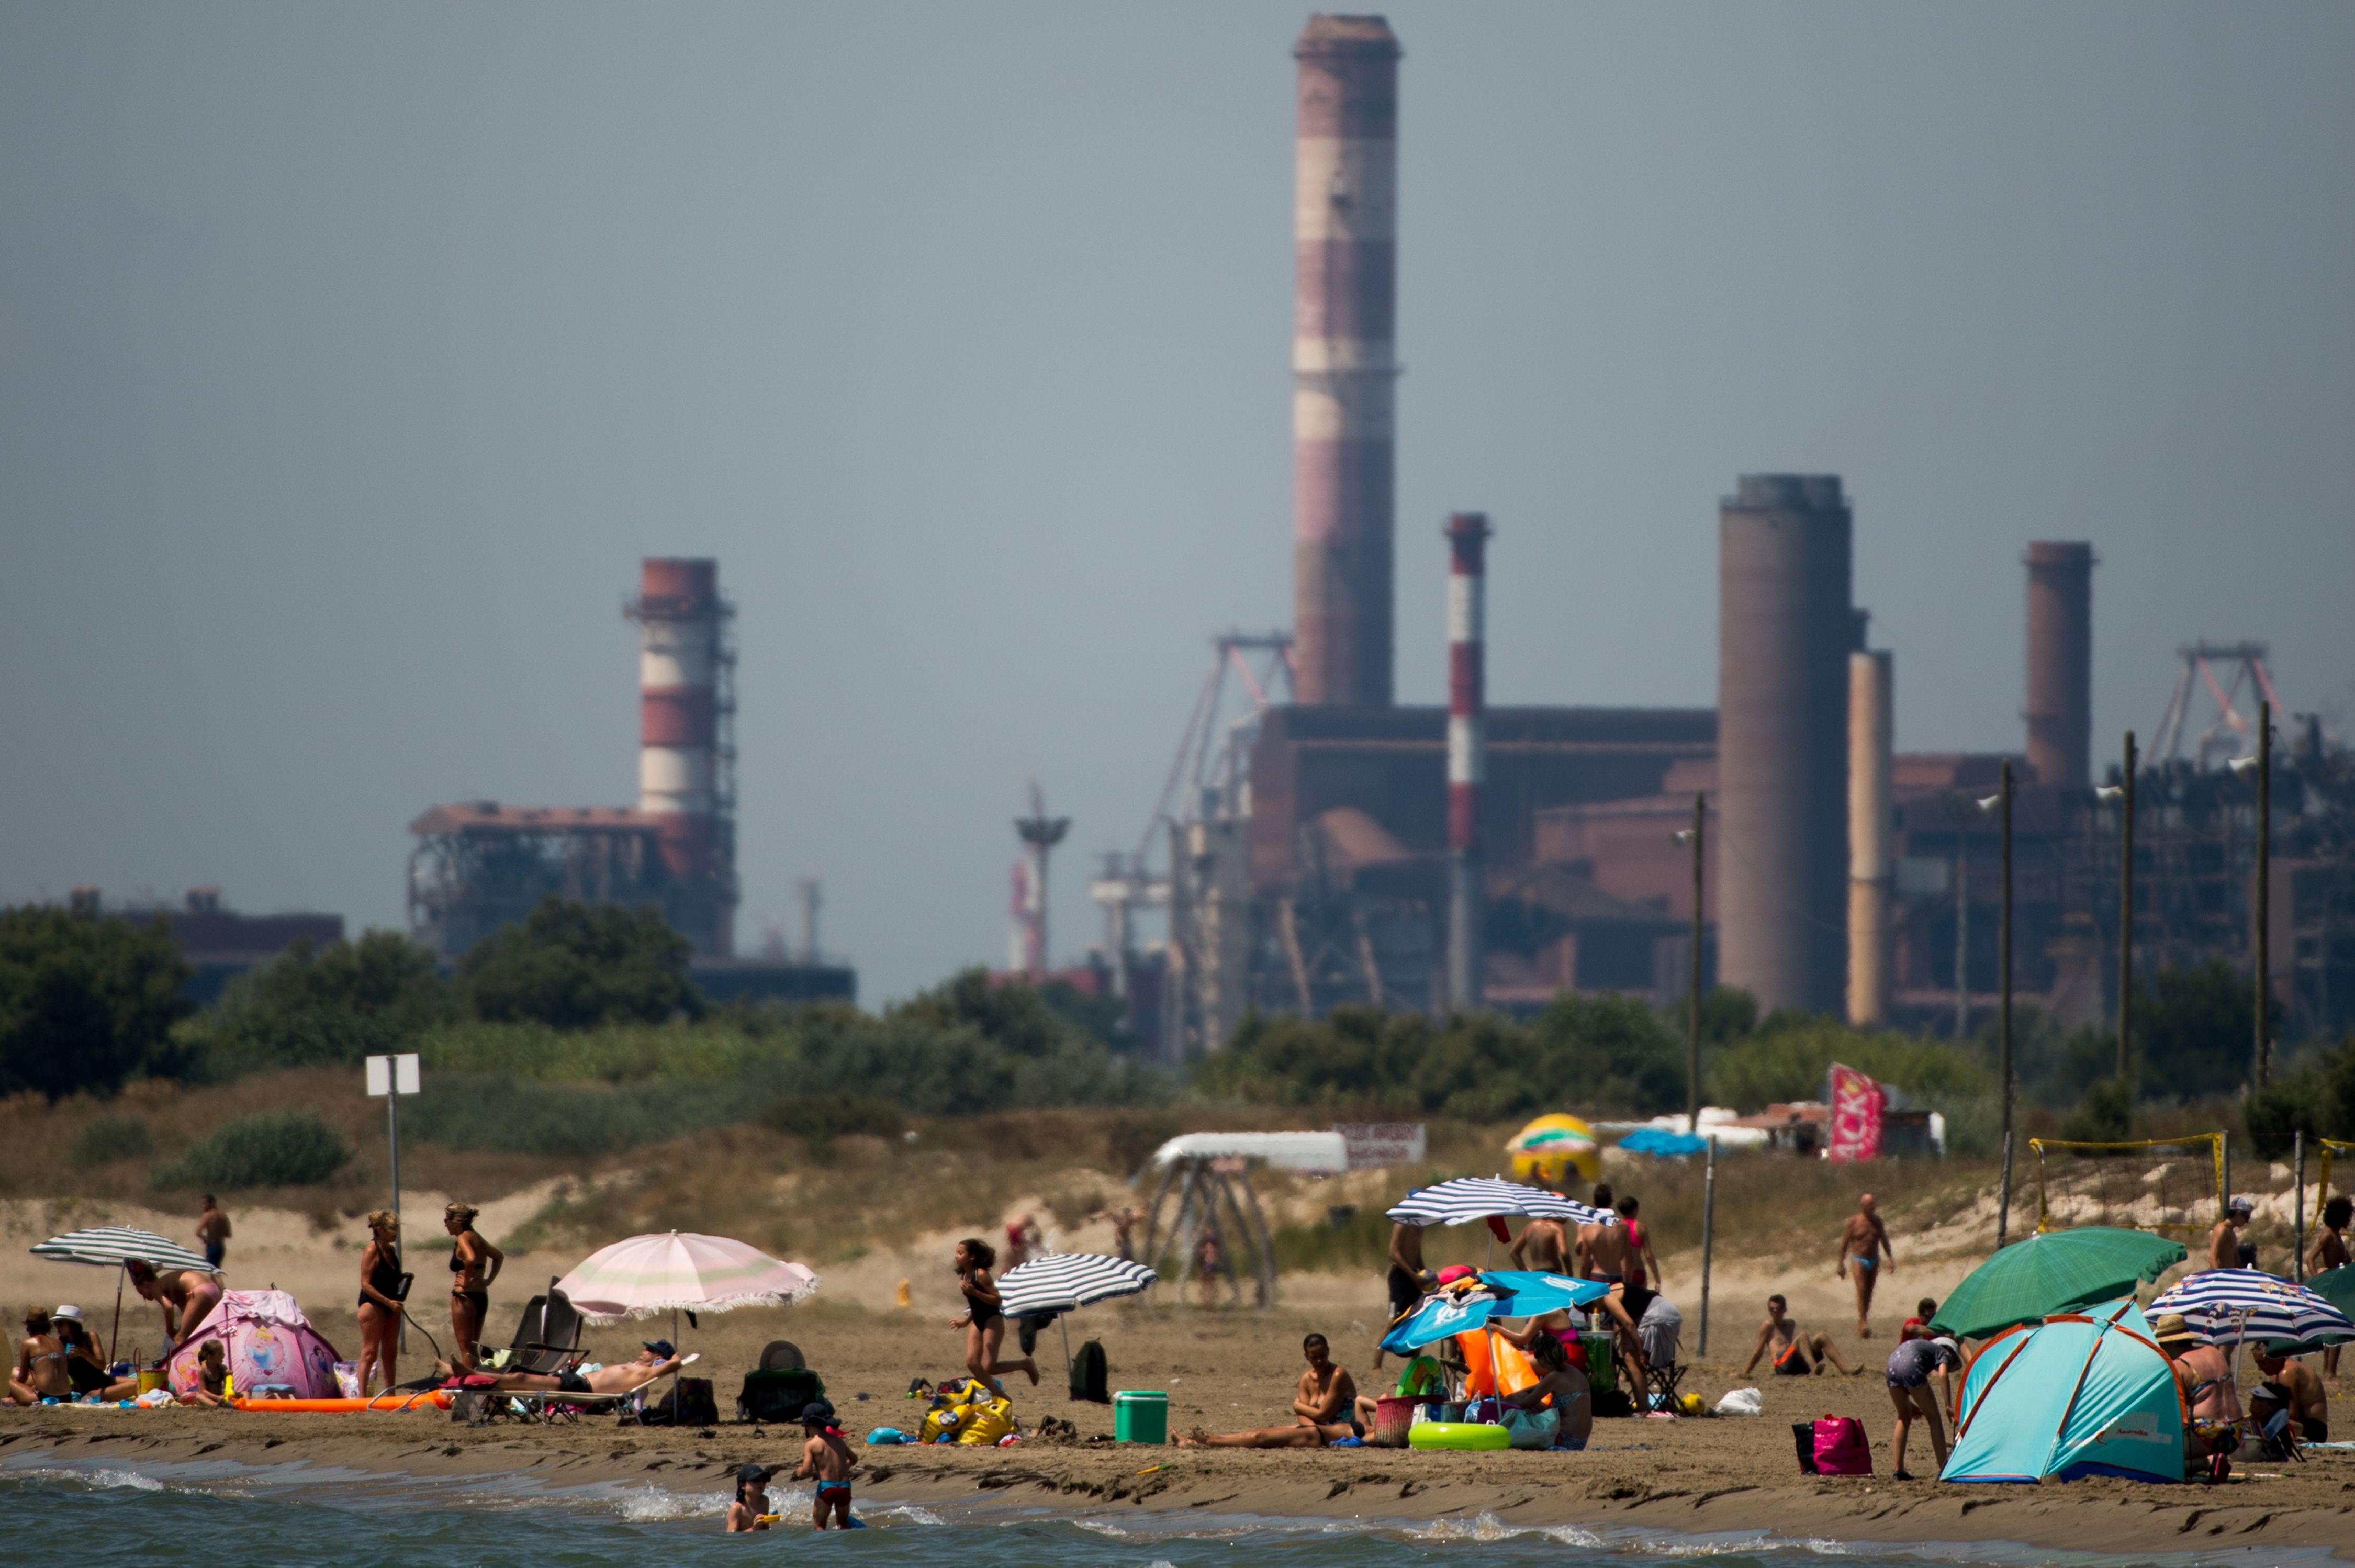 People bathe in the sea next to an industrial area in Fos-sur Mer, southern France.